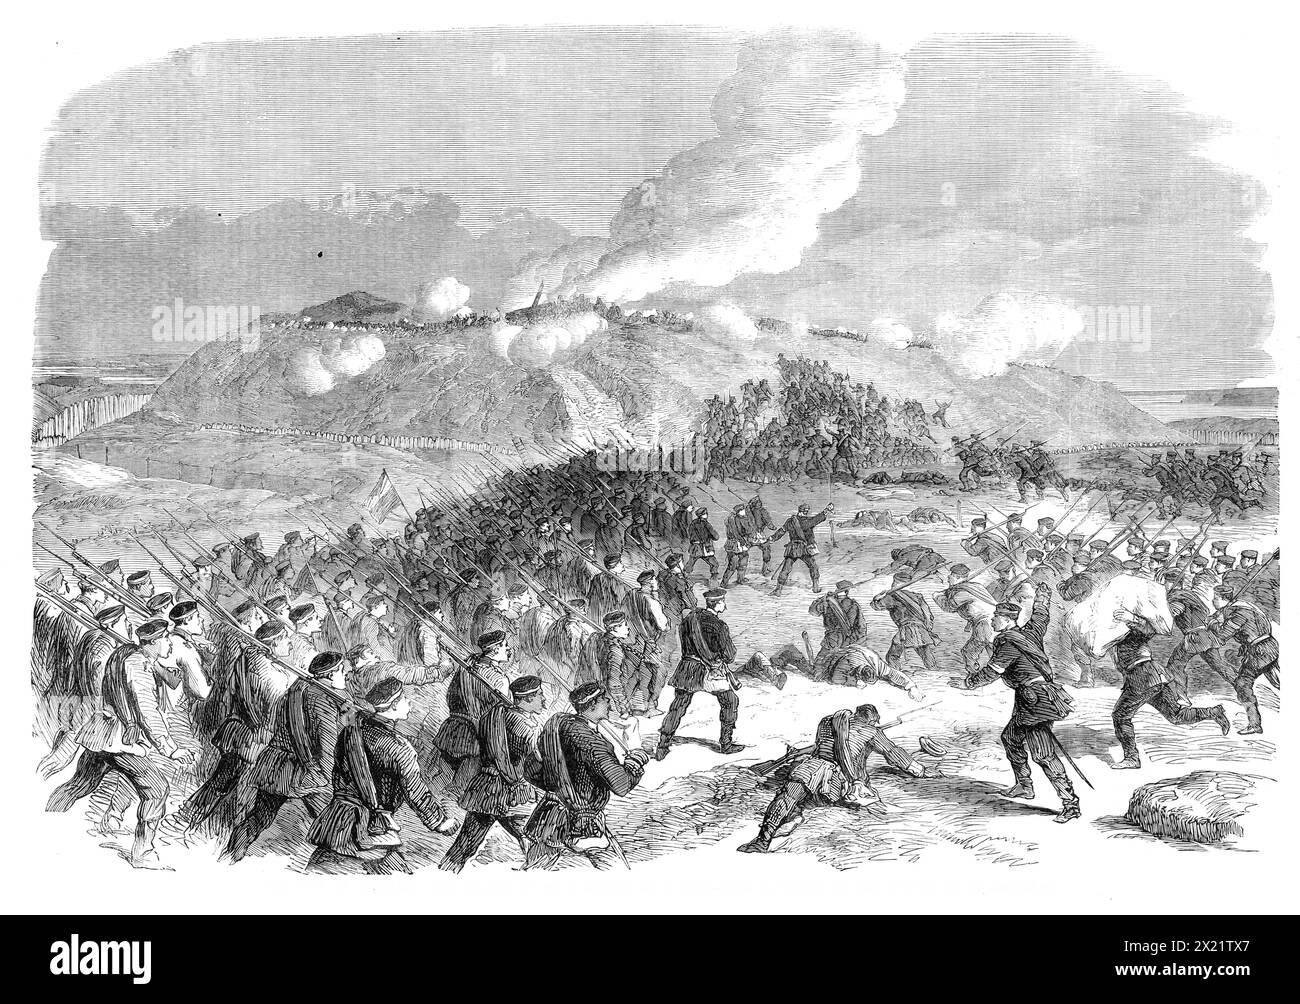 The War in Denmark: the assault on No. 4 Redoubt at D&#xfc;ppel - from a sketch by our special artist, 1864. 'Since the seaward redoubts, No. 1 and No. 2, had been dismantled and silenced by the Prussian cannonade on former days, No. 4, which was the largest and most formidable of all, became the principal stronghold of the Danes to the left of their line. It commanded the road which leads from Gravenstein to Sonderburg right up the hill of D&#xfc;ppel, so that if this redoubt were once taken the enemy's artillery might find an easy passage to the rear of the Danish position...These observatio Stock Photo